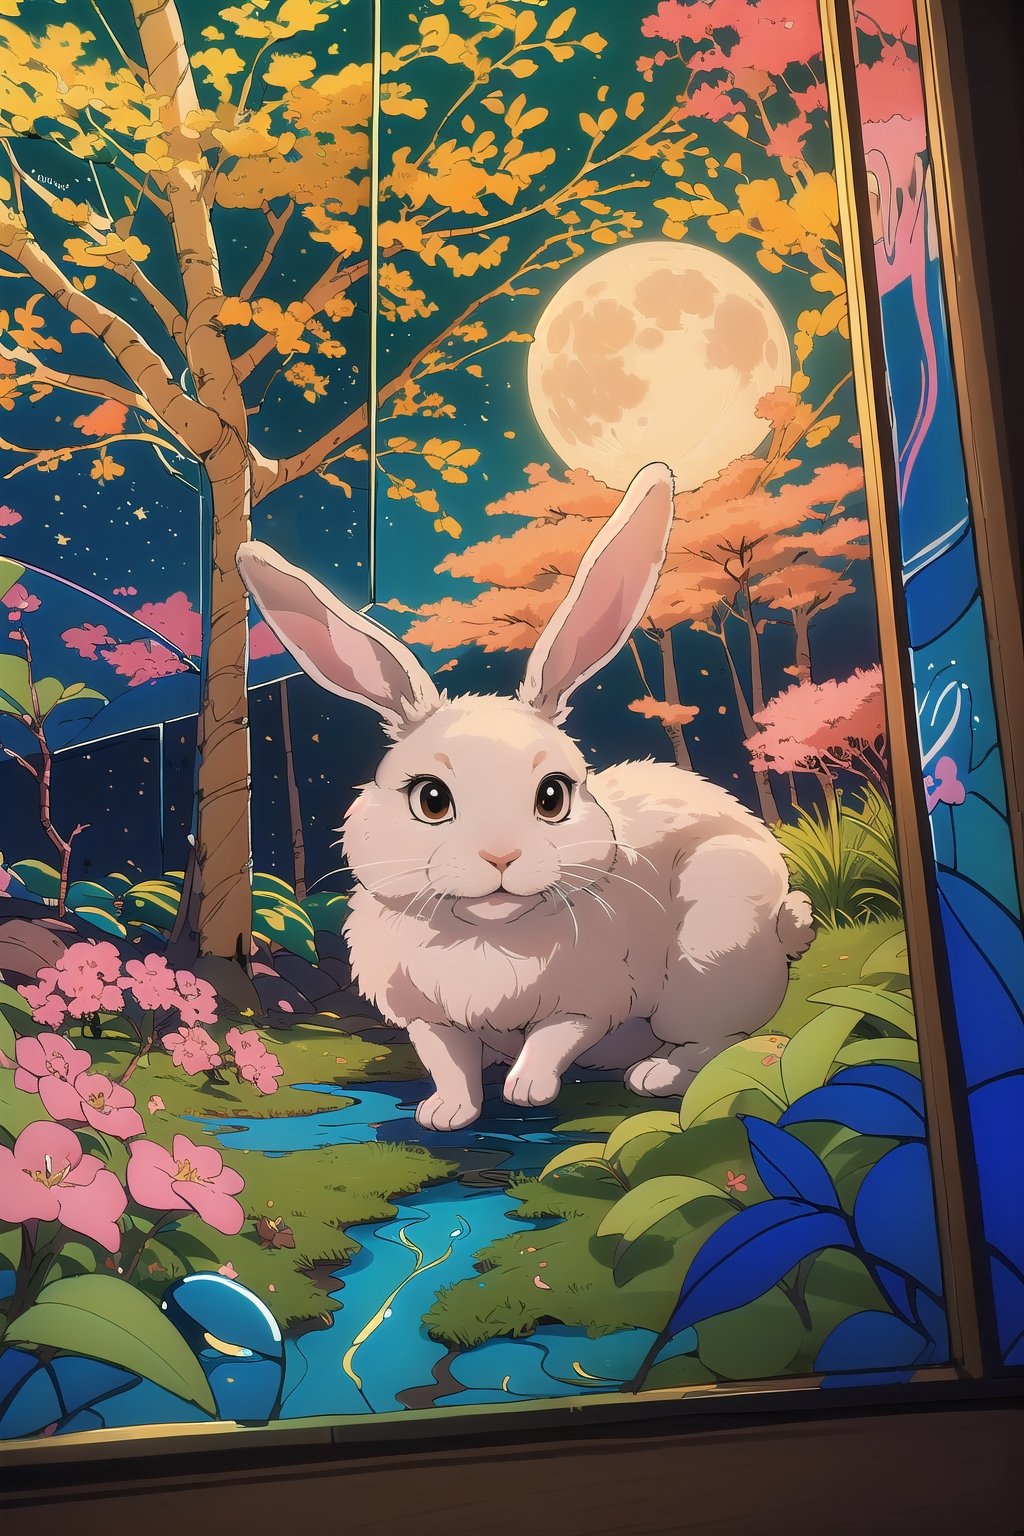 The moon, a rabbit, stand under a sakura tree, painting dreams on the night sky,  hillside, Cubism, side lit, Selective focus, Kodachrome, gilded technique, Batik, sophisticated composition, artistic, detailed, sharp, very coherent, calm, complimentary colors,(((glass art,))),lofi artstyle